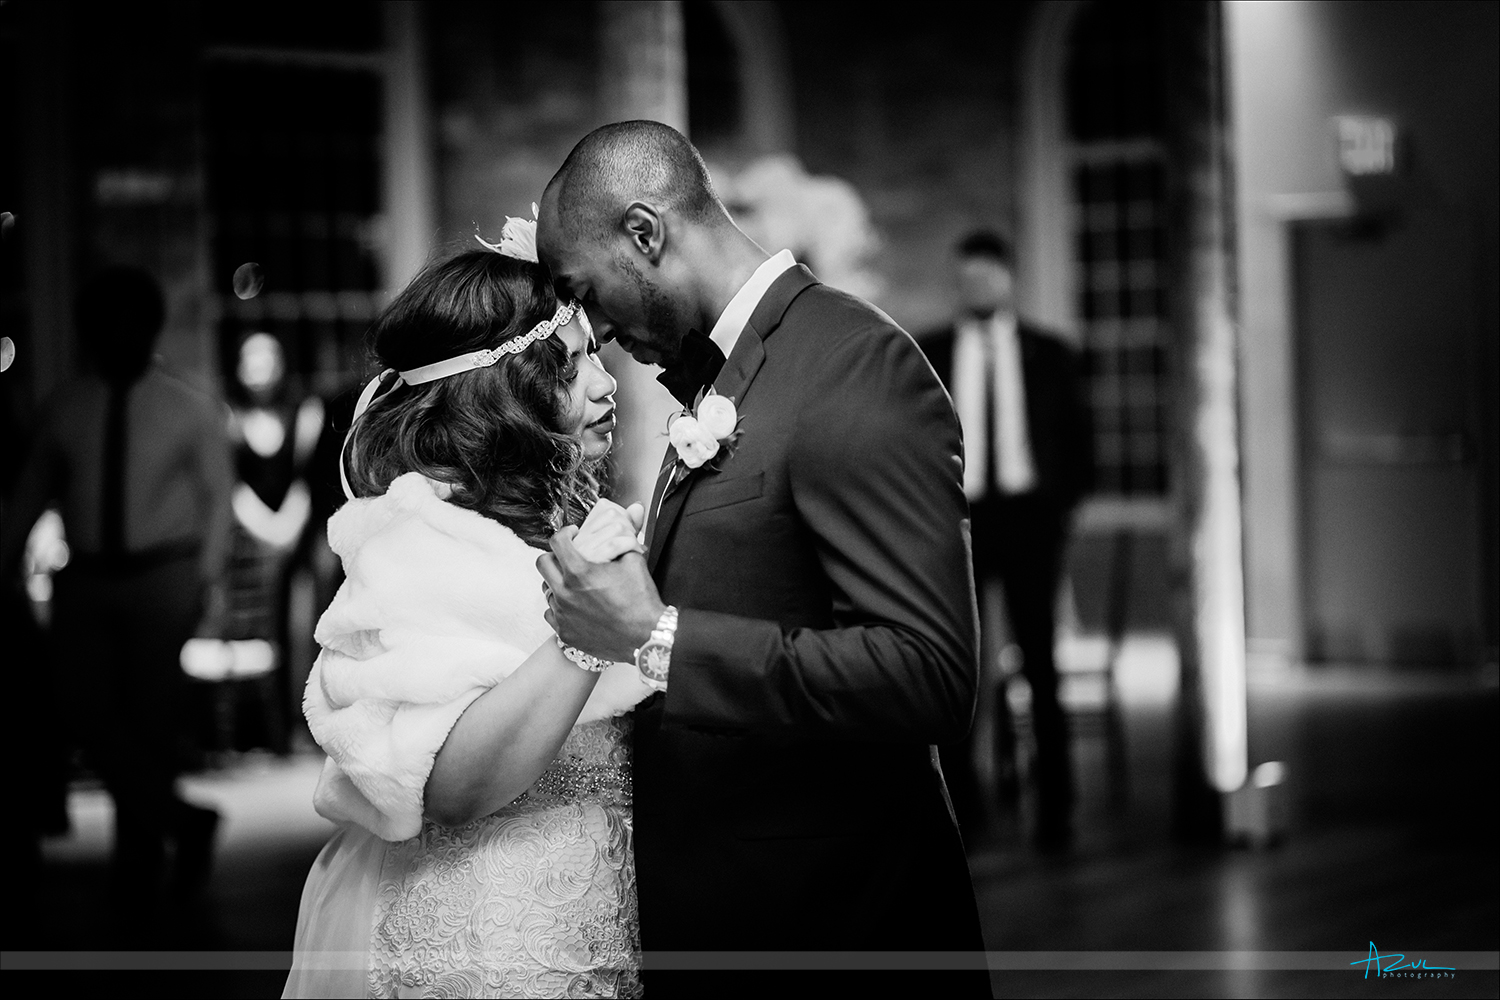 Beautiful moment between the bride and groom during their first dance at their wedding reception in Durham NC